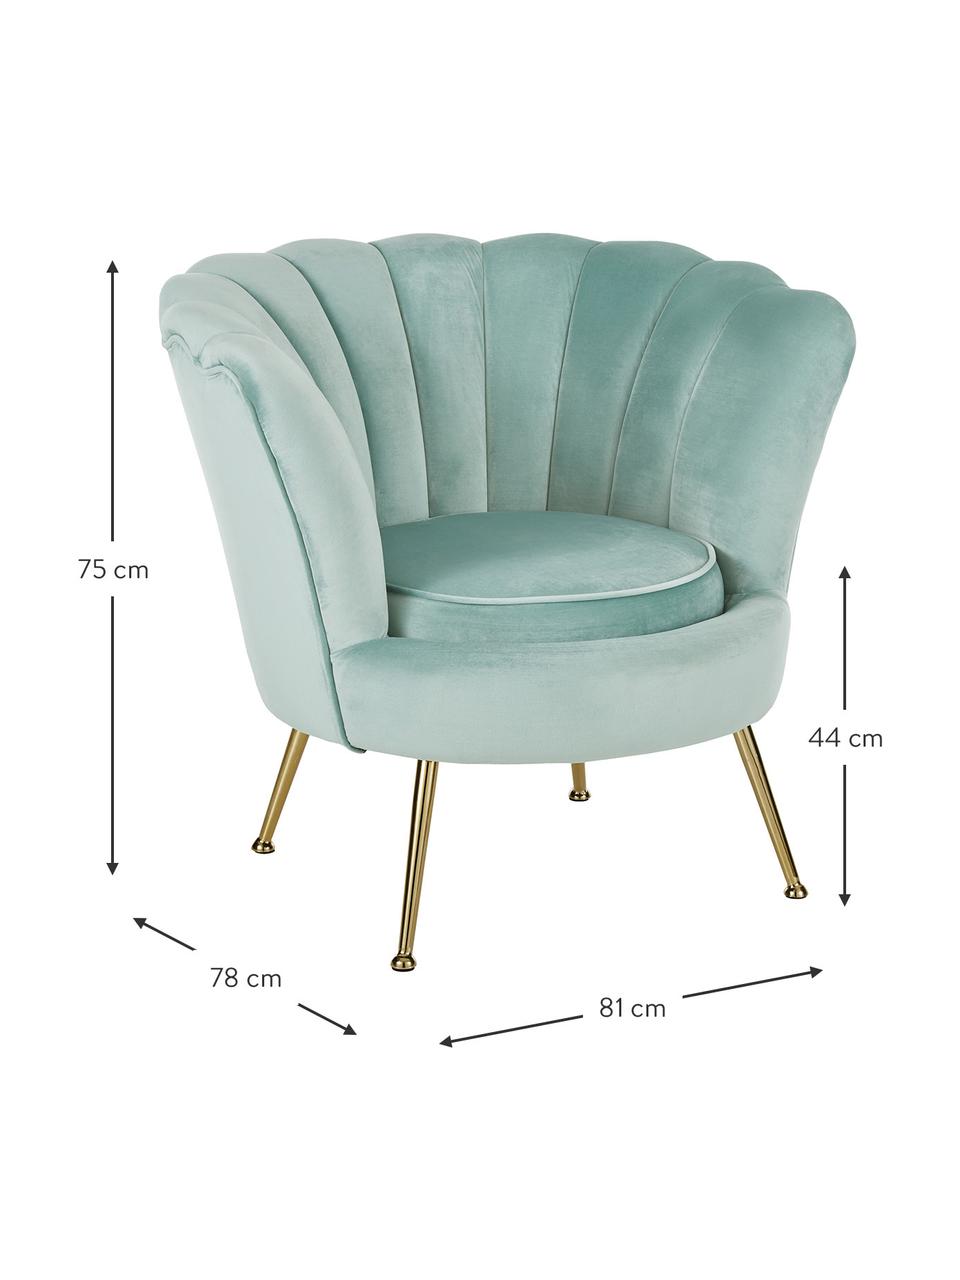 Fauteuil cocktail velours Oyster, Velours turquoise, larg. 81 x prof. 78 cm